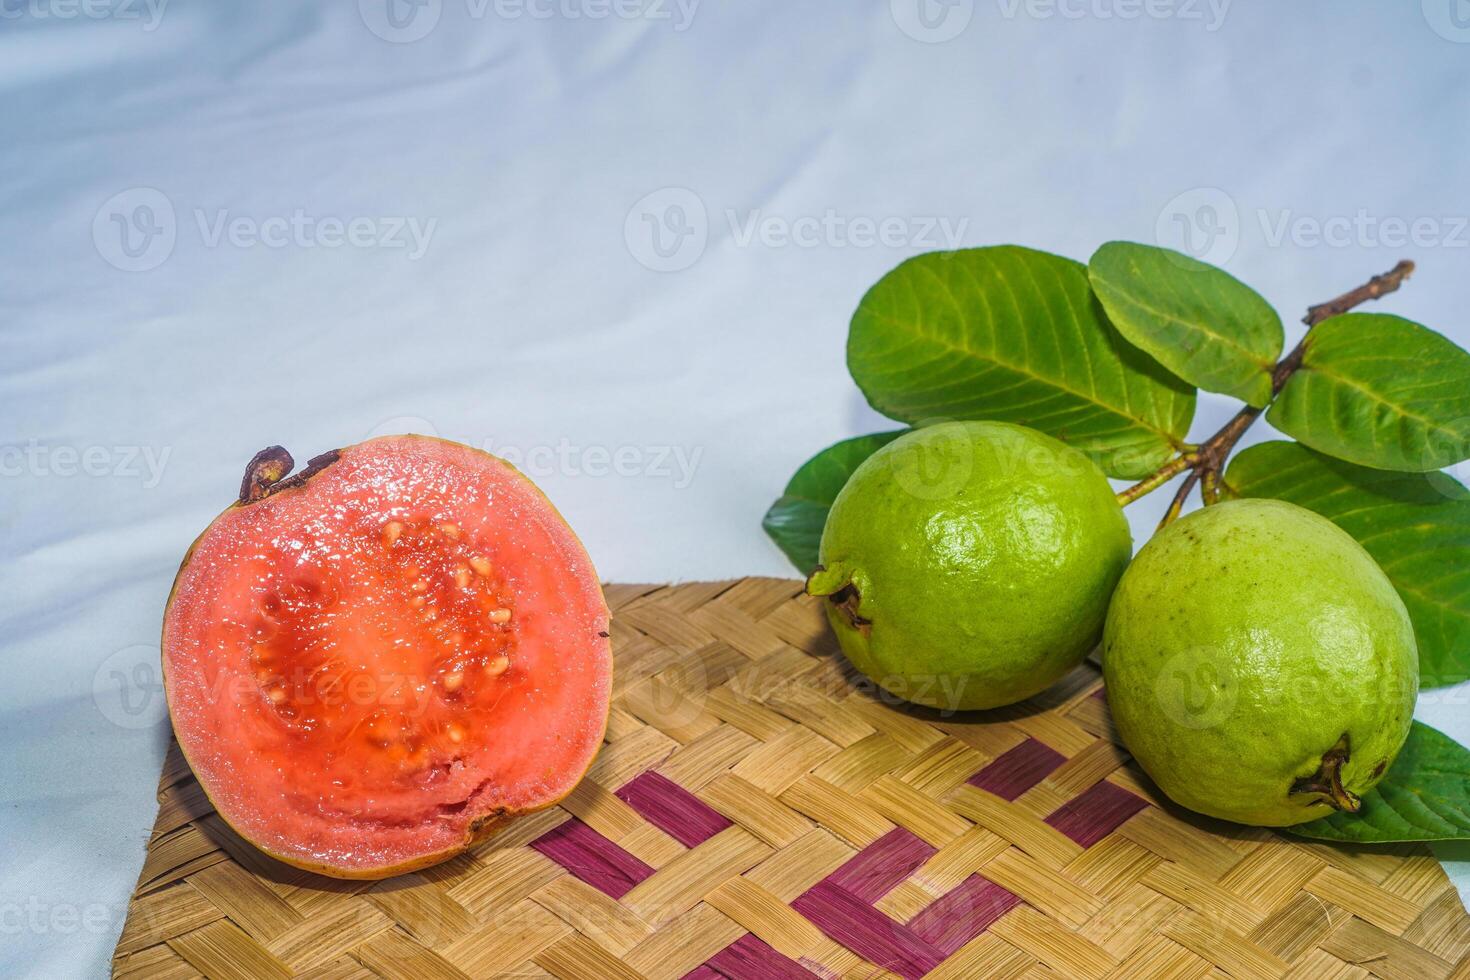 Guava isolated. Collection of red fleshed guava fruit with yellowish green skin and leaves isolated on a white background with bamboo matting. photo